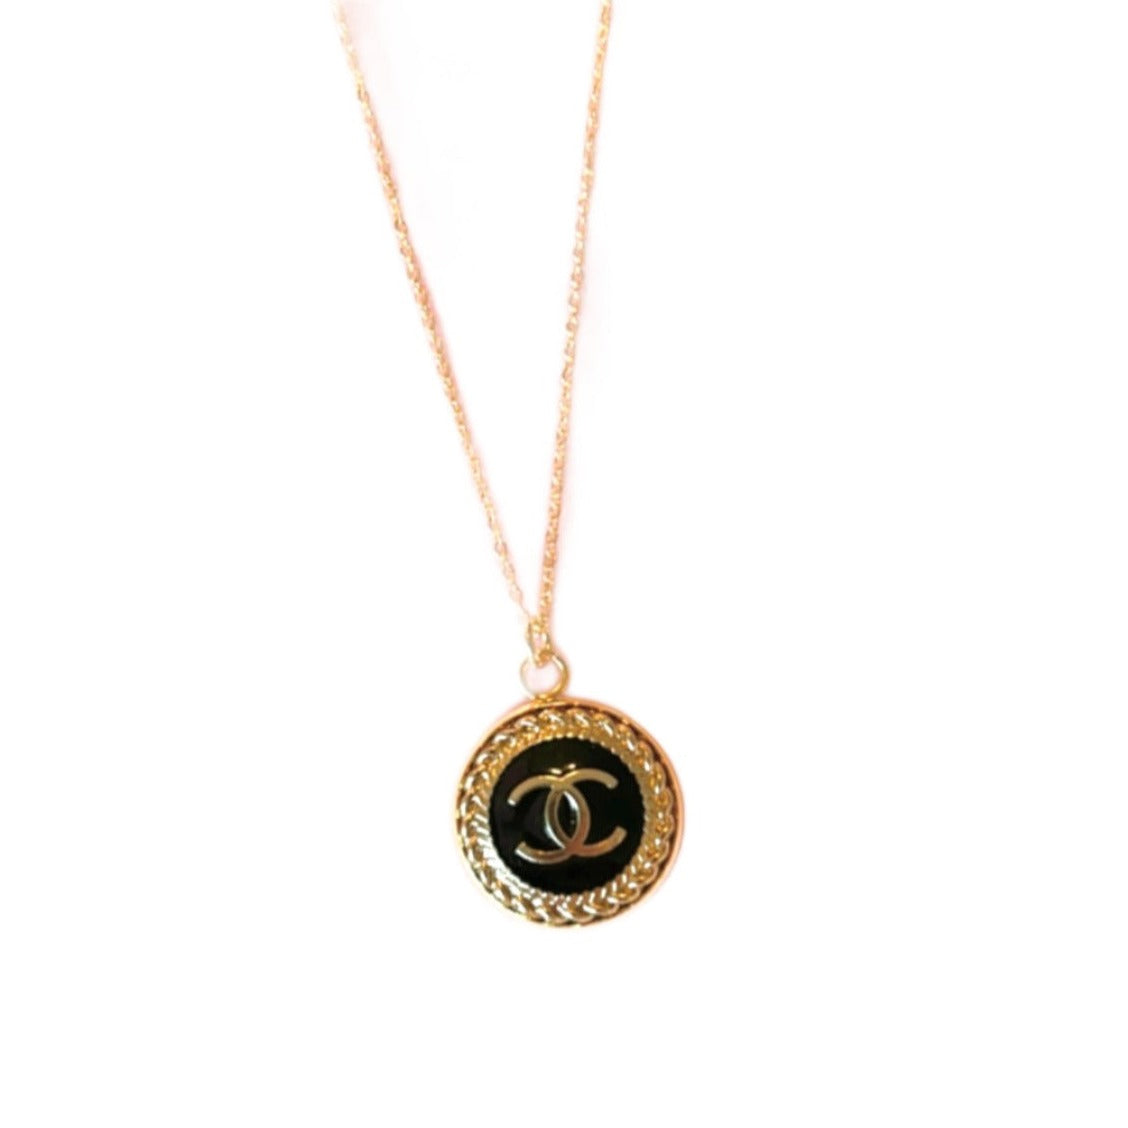 The Medallion Necklace in Black